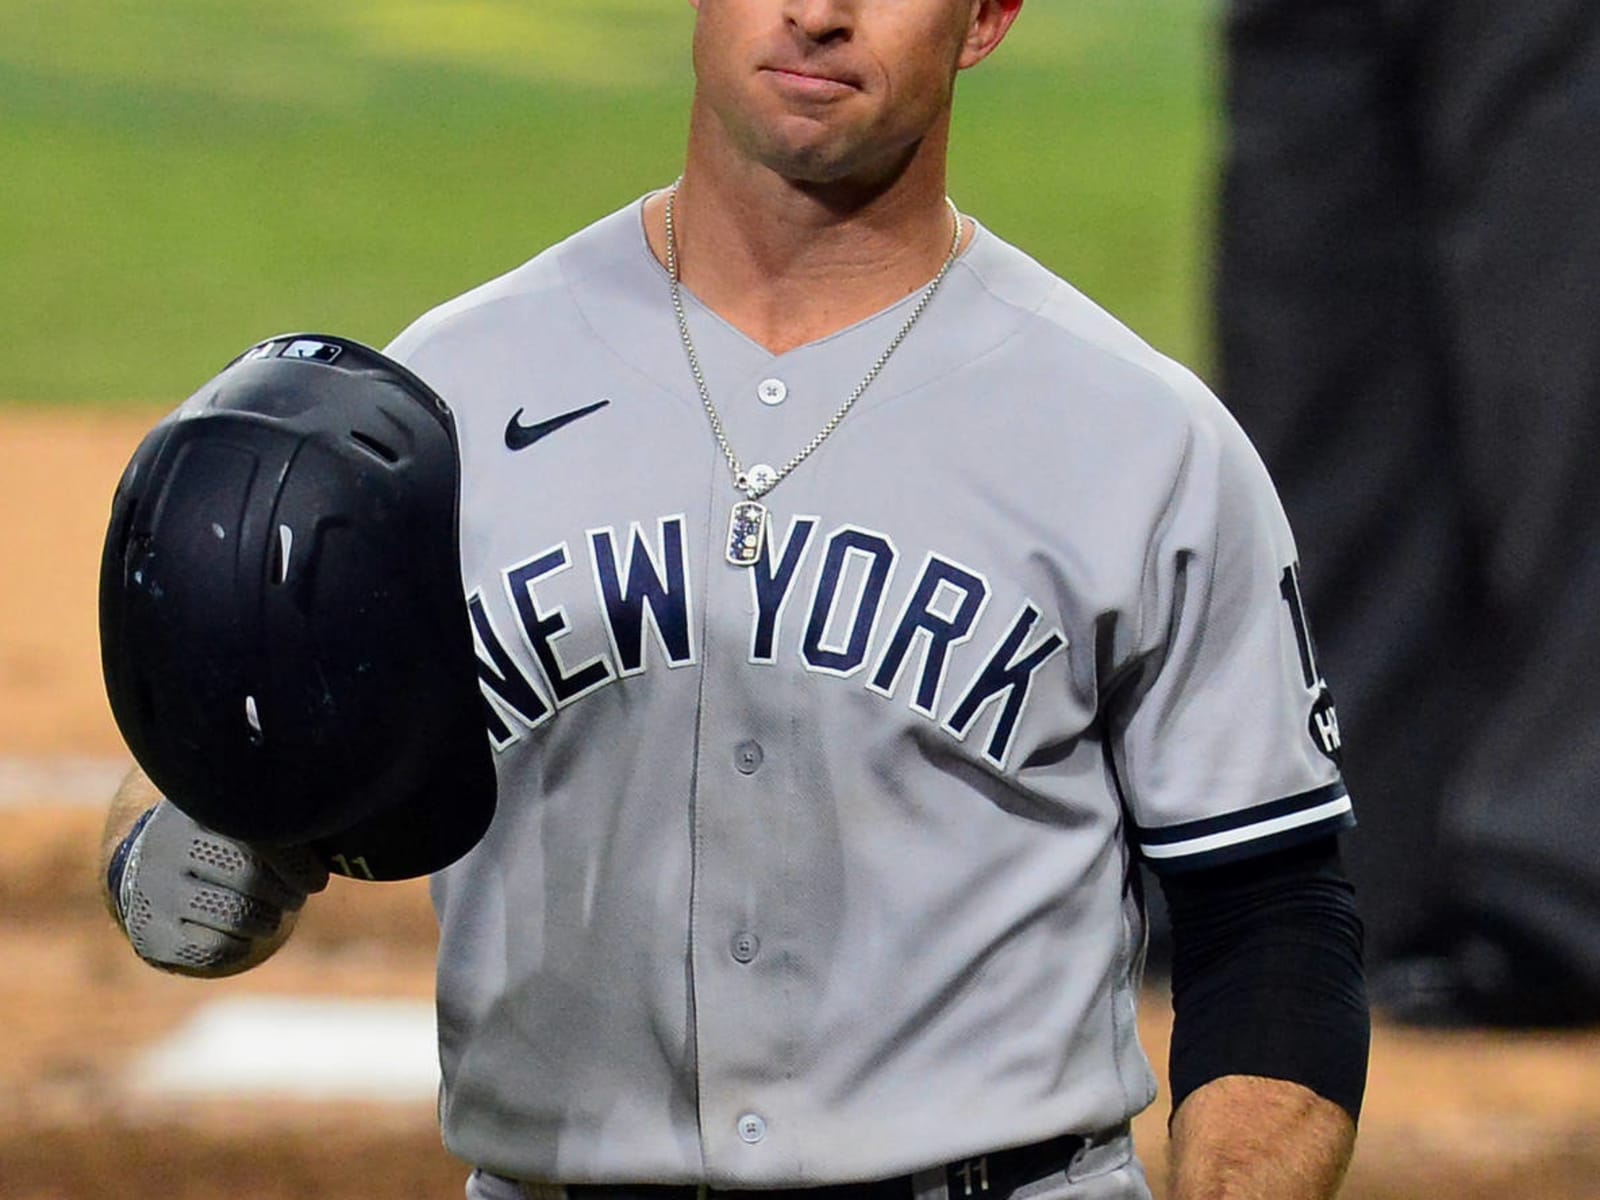 Brett Gardner and Yankees agree to $2.8 million, 1-year contract